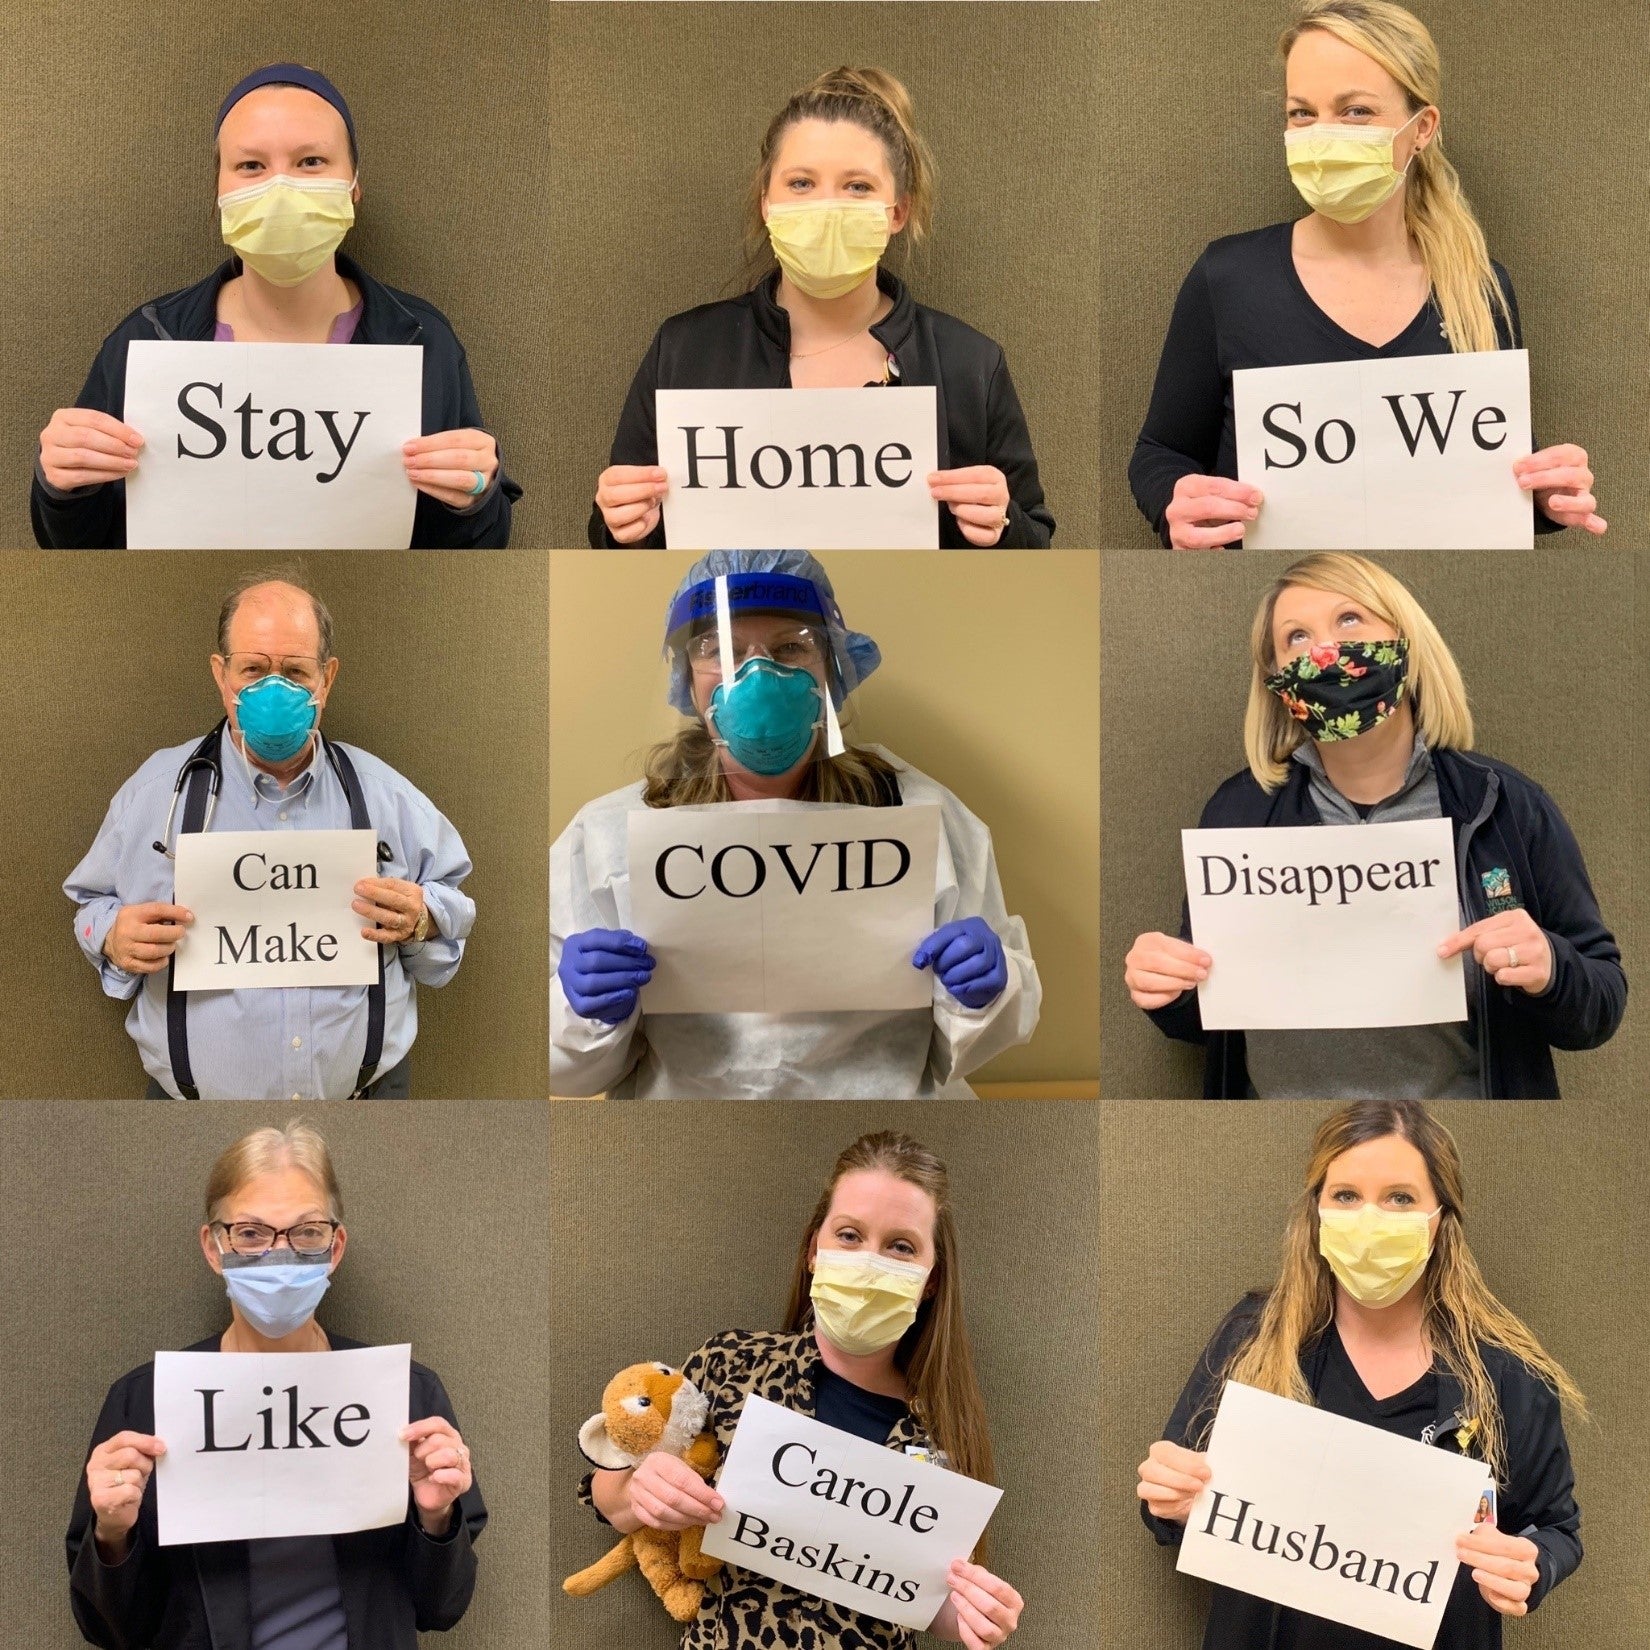 Nine clinicians with masks on  in a 3x3 grid with signs that say, "Stay home so we can make COVID disappear like Carole Baskin's husband."